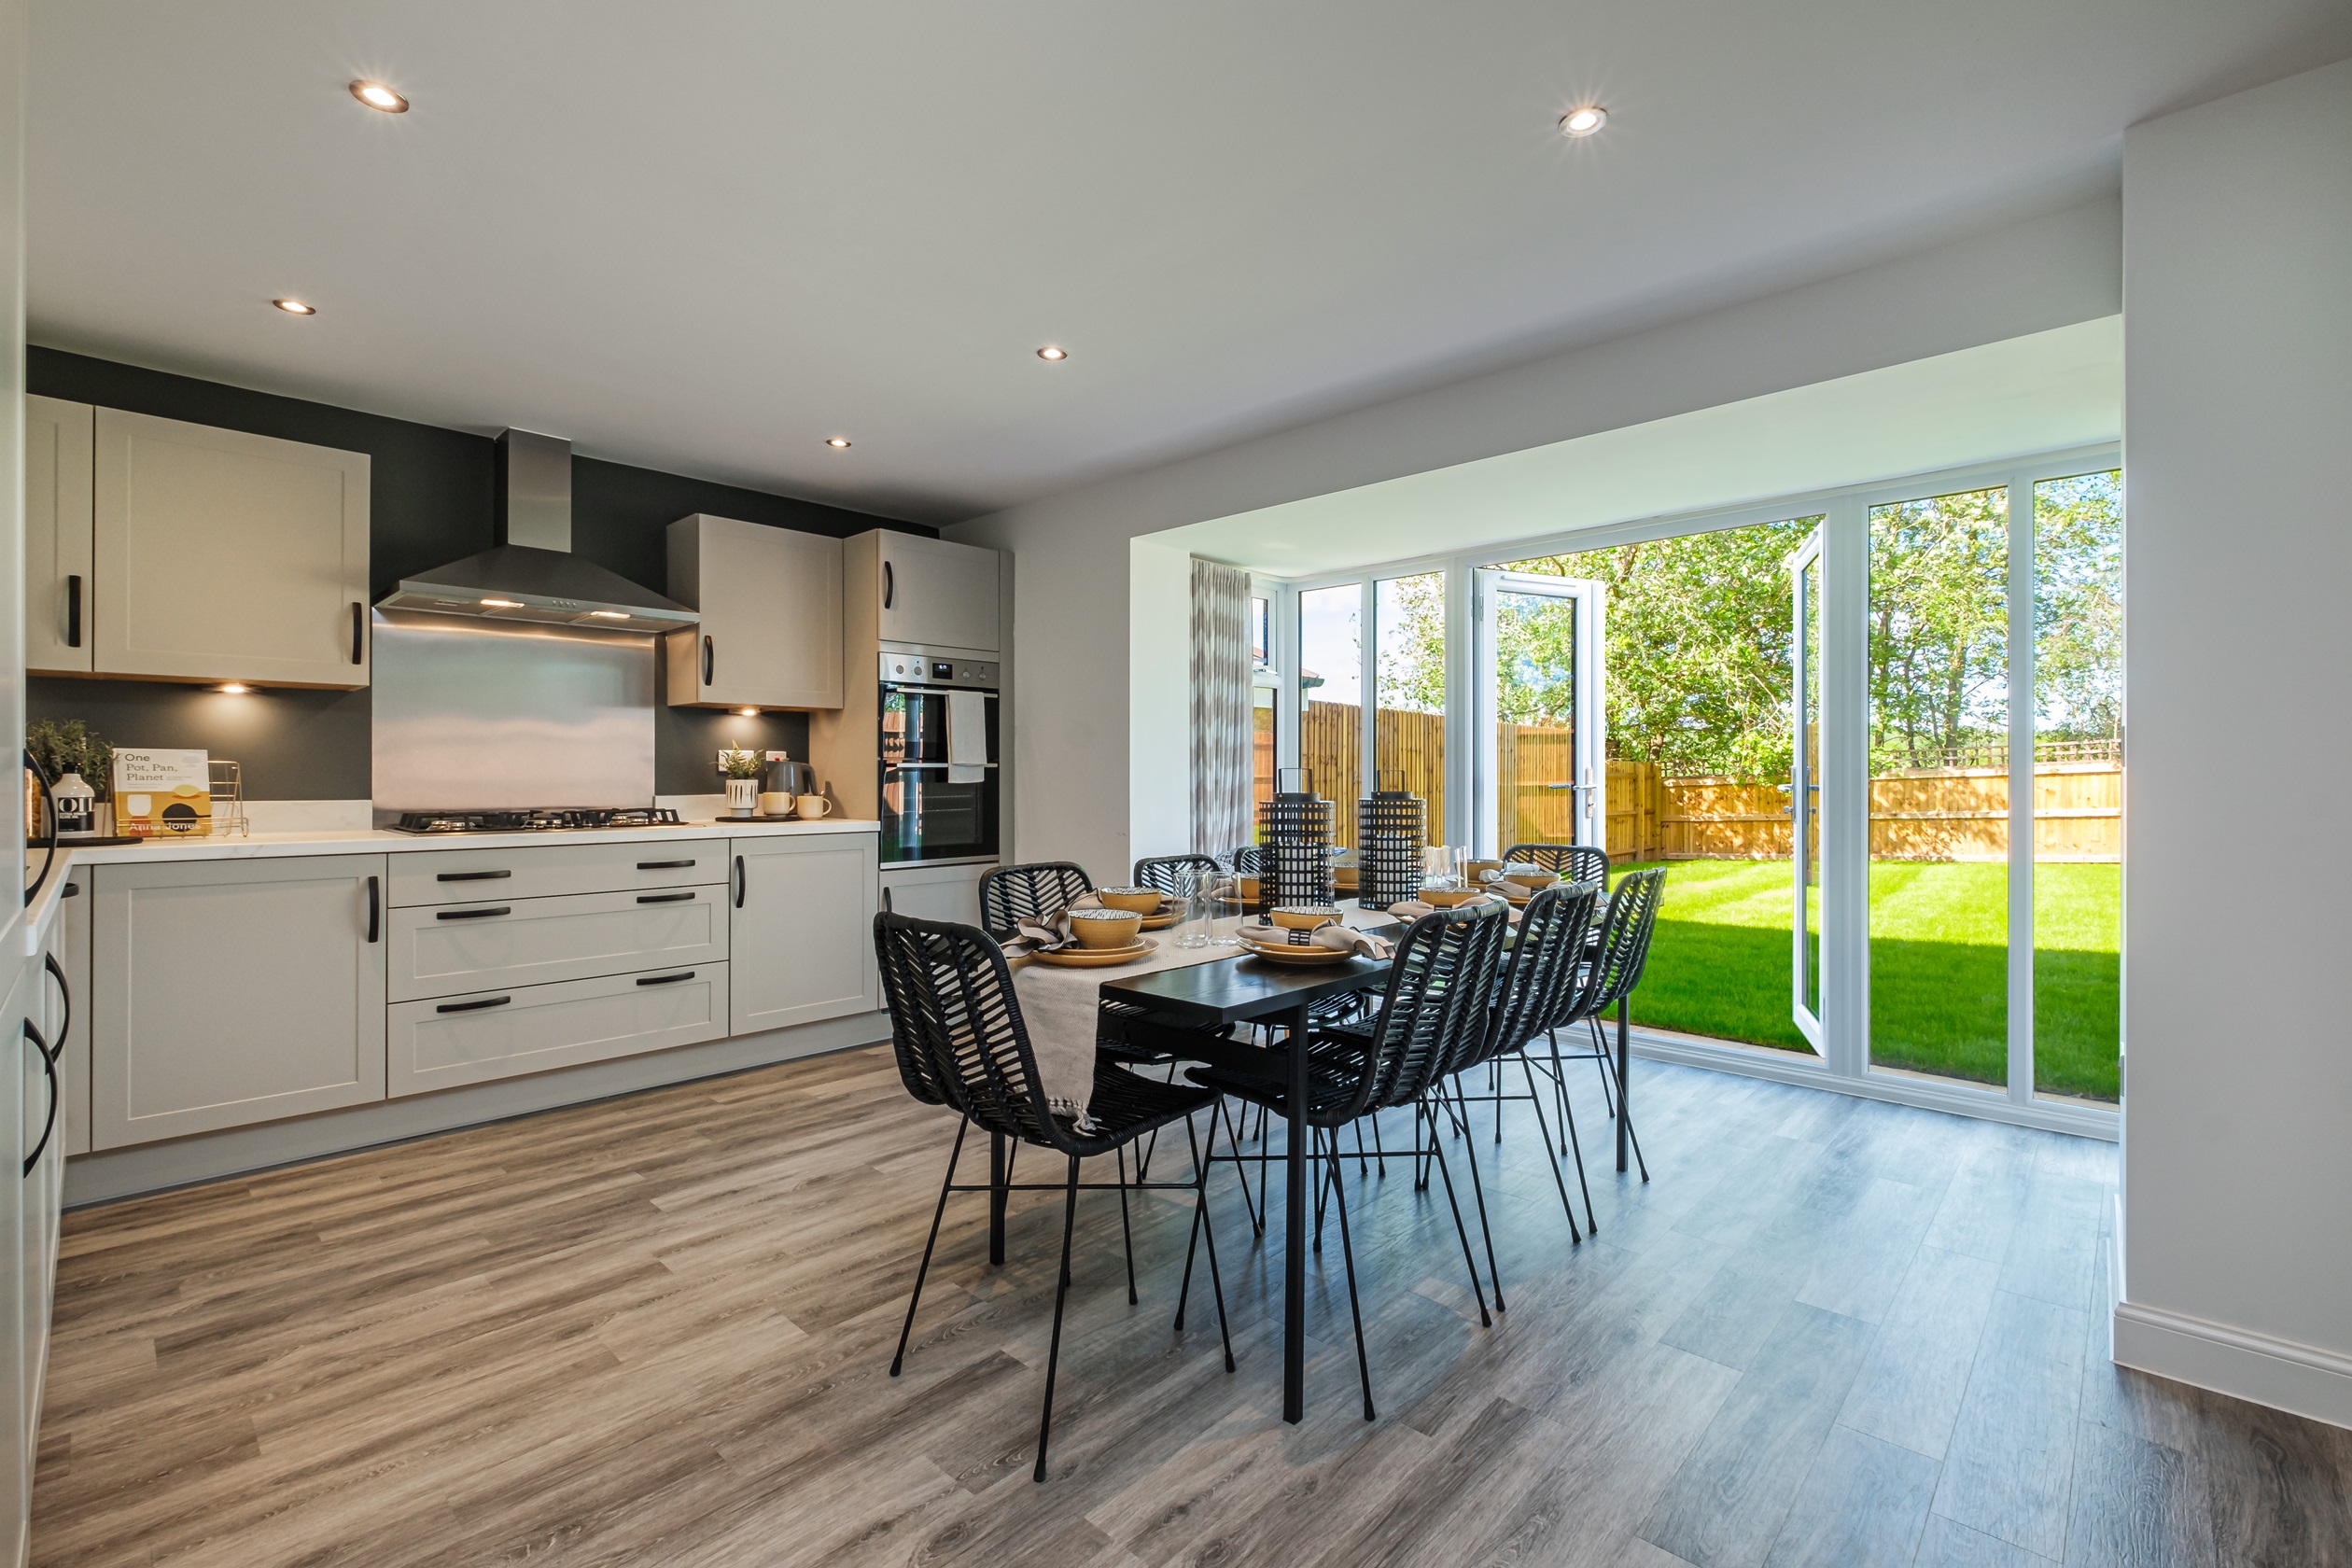 Property 2 of 10. Kitchen Diner With French Doors In An Exeter Home